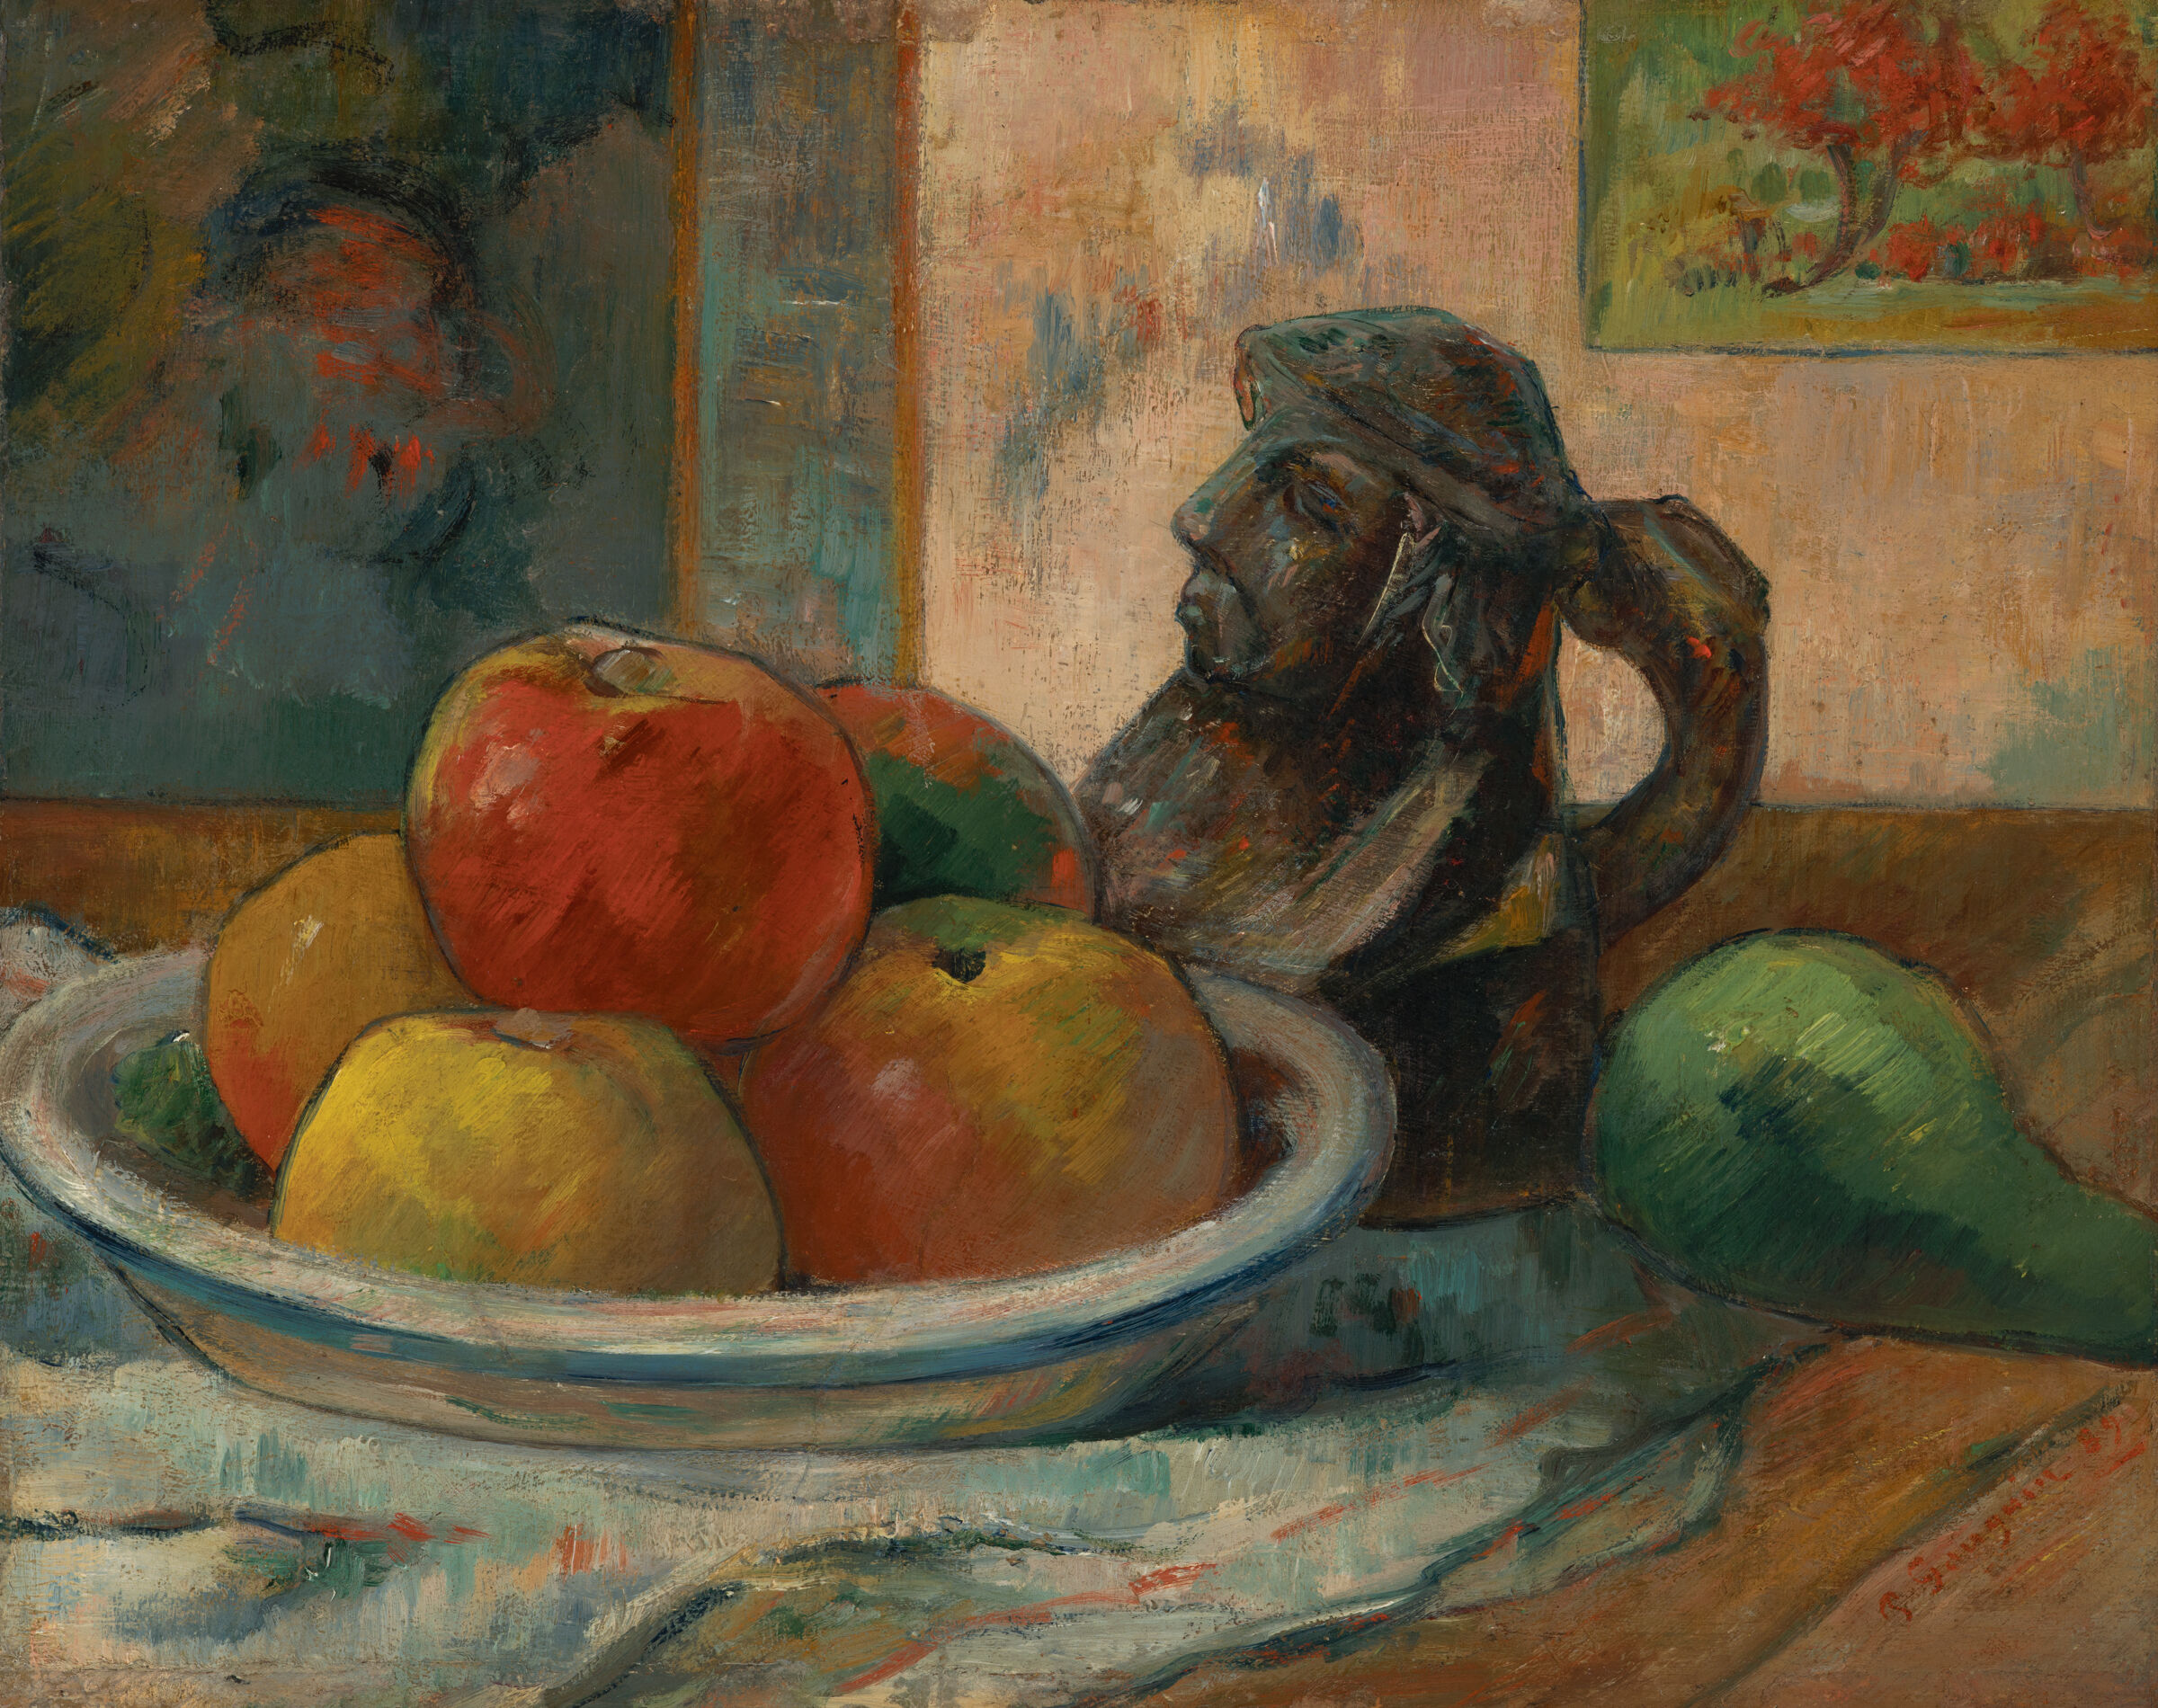 Still Life With Apples, A Pear, And A Ceramic Portrait Jug